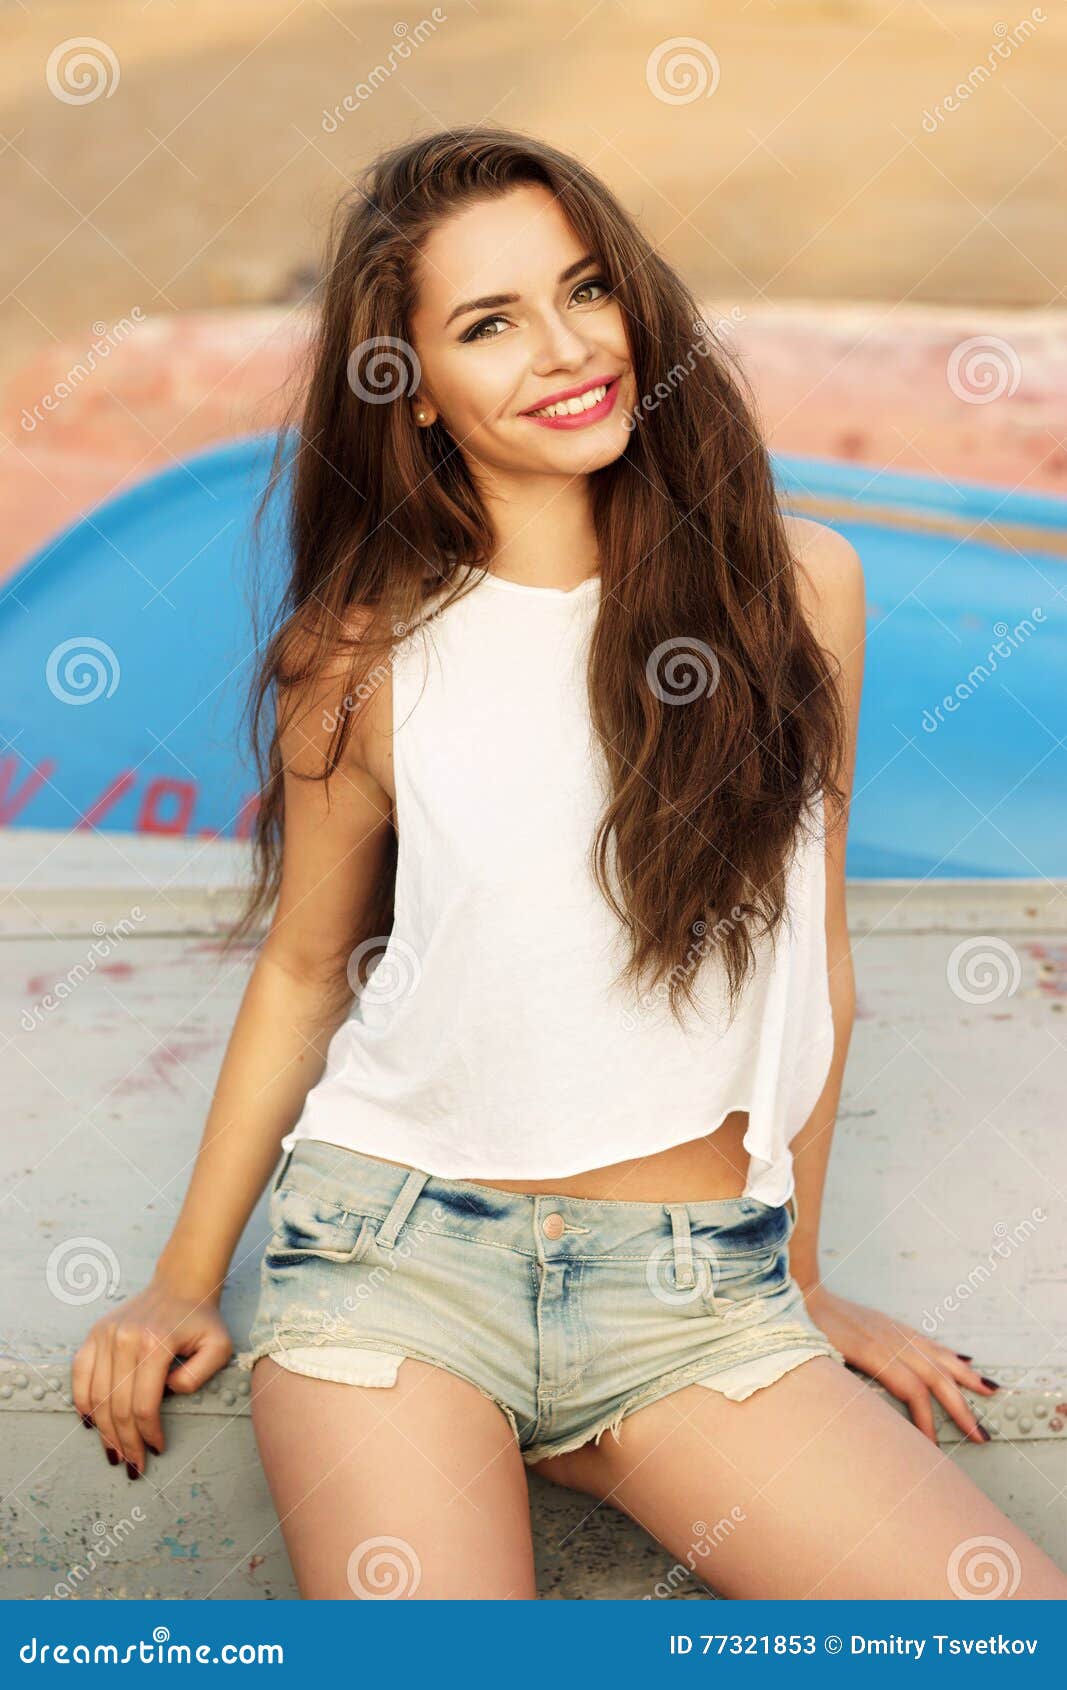 Happy Smiling Girl Sitting at Beach Stock Image - Image of beautiful ...